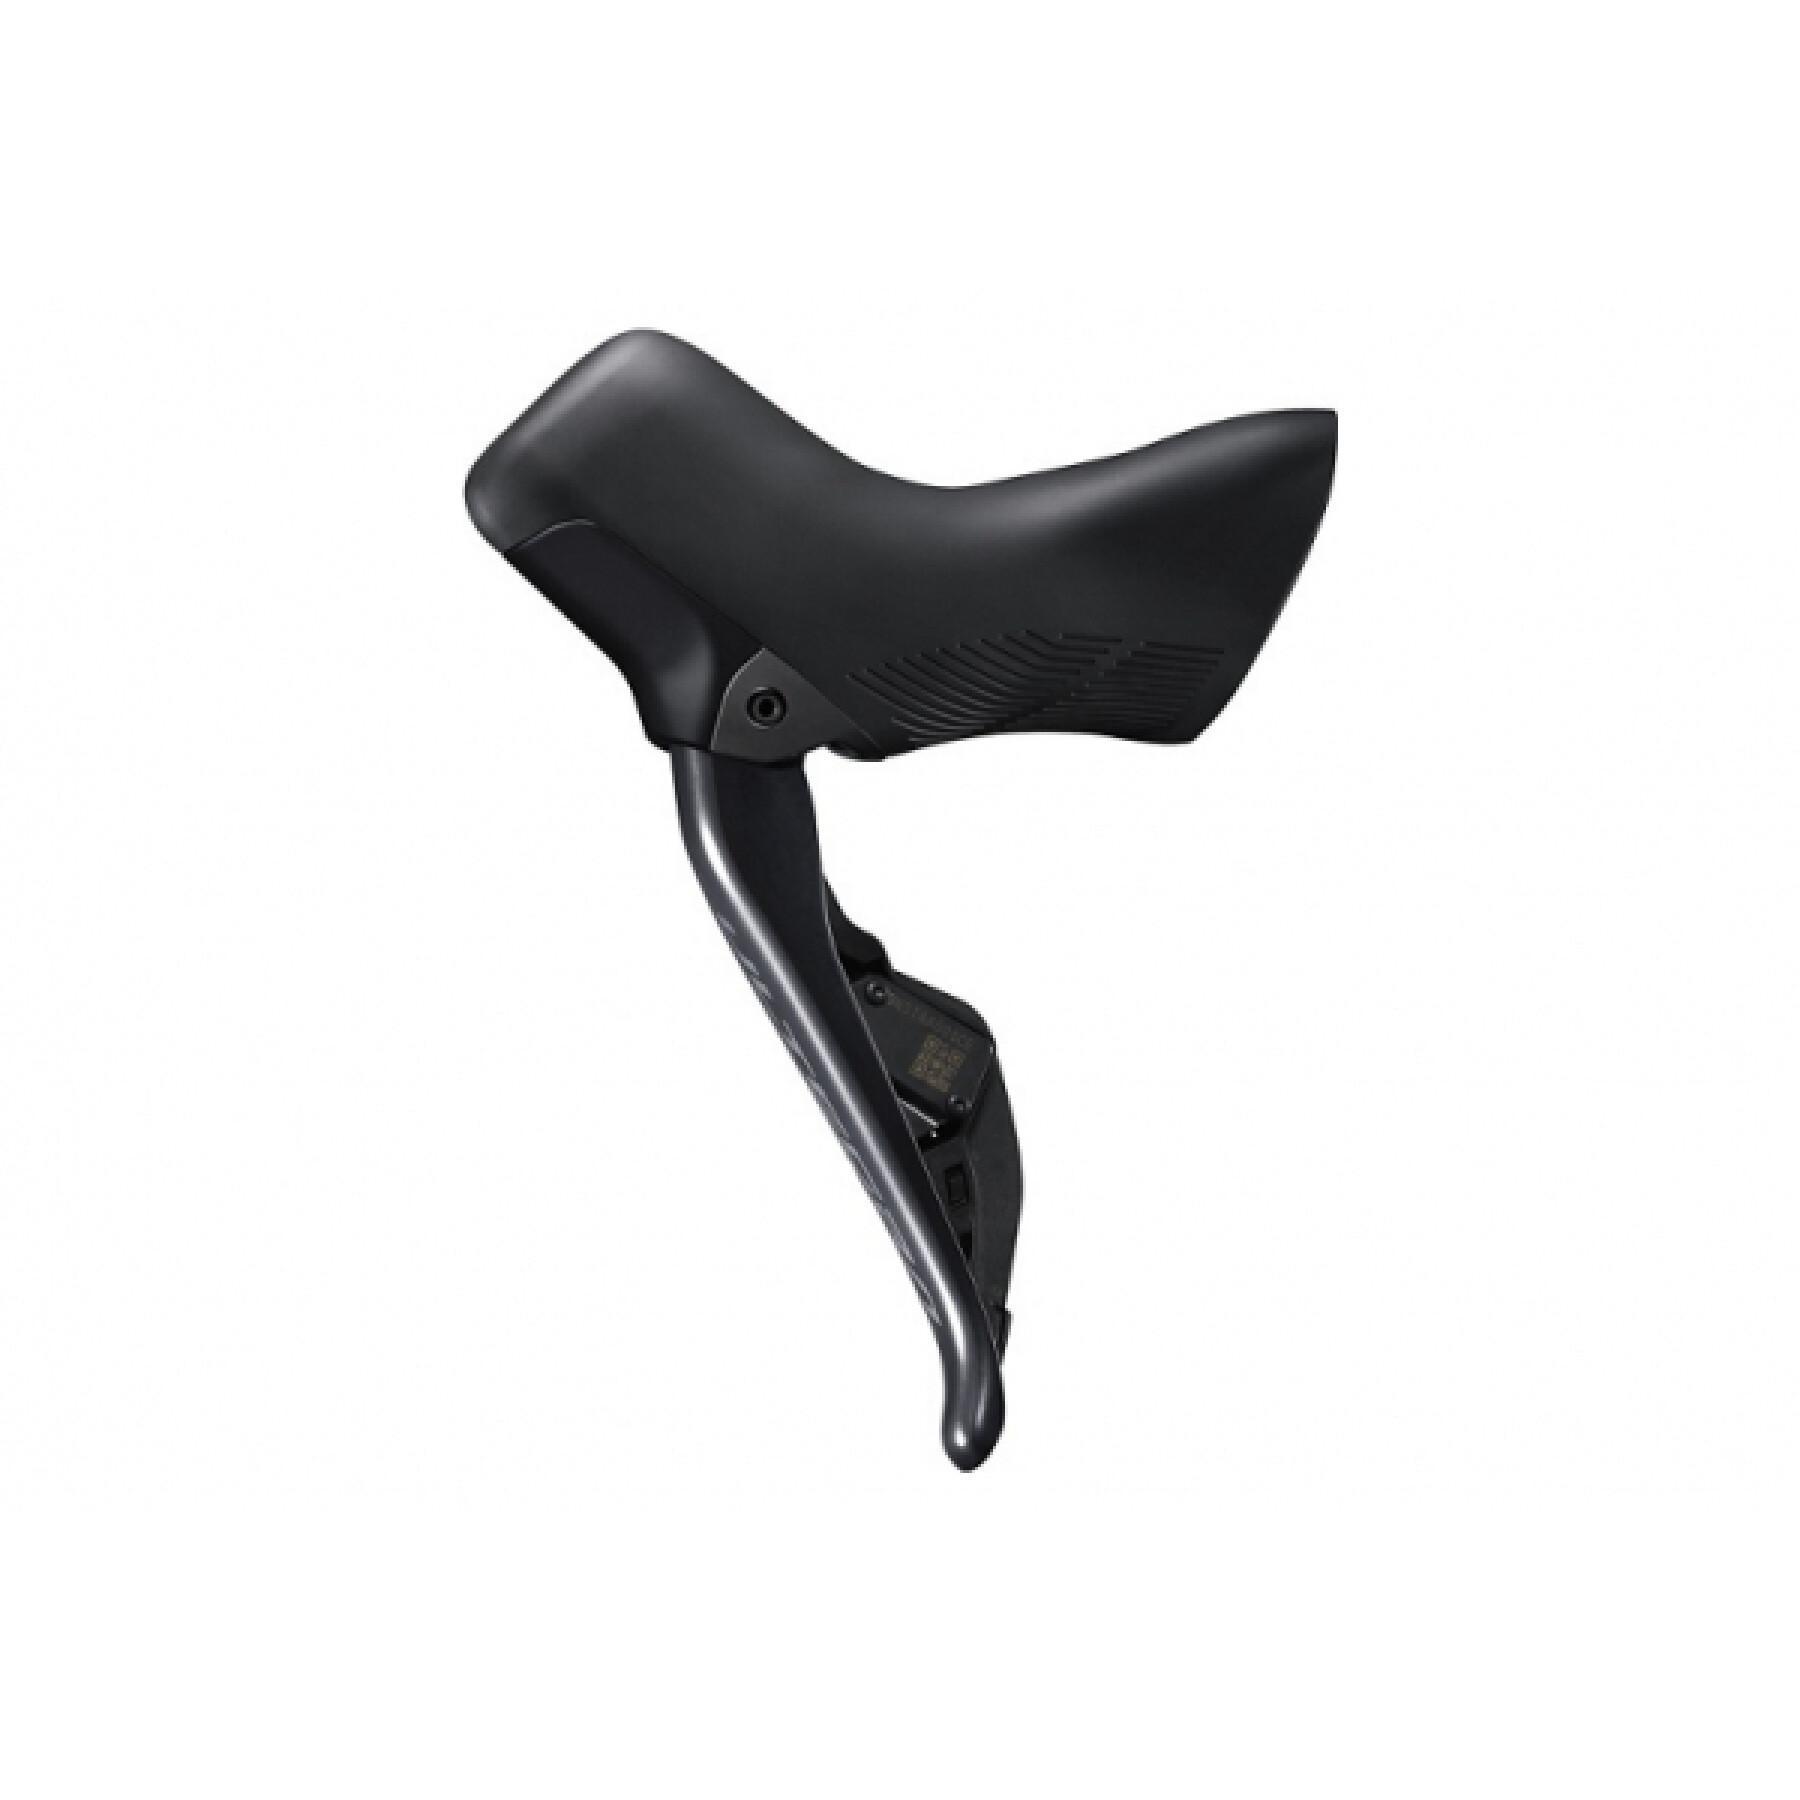 Double control lever for derailleur and brake (for racing handlebars, hydraulic disc brake) Shimano Ultegra ST-R8170-R